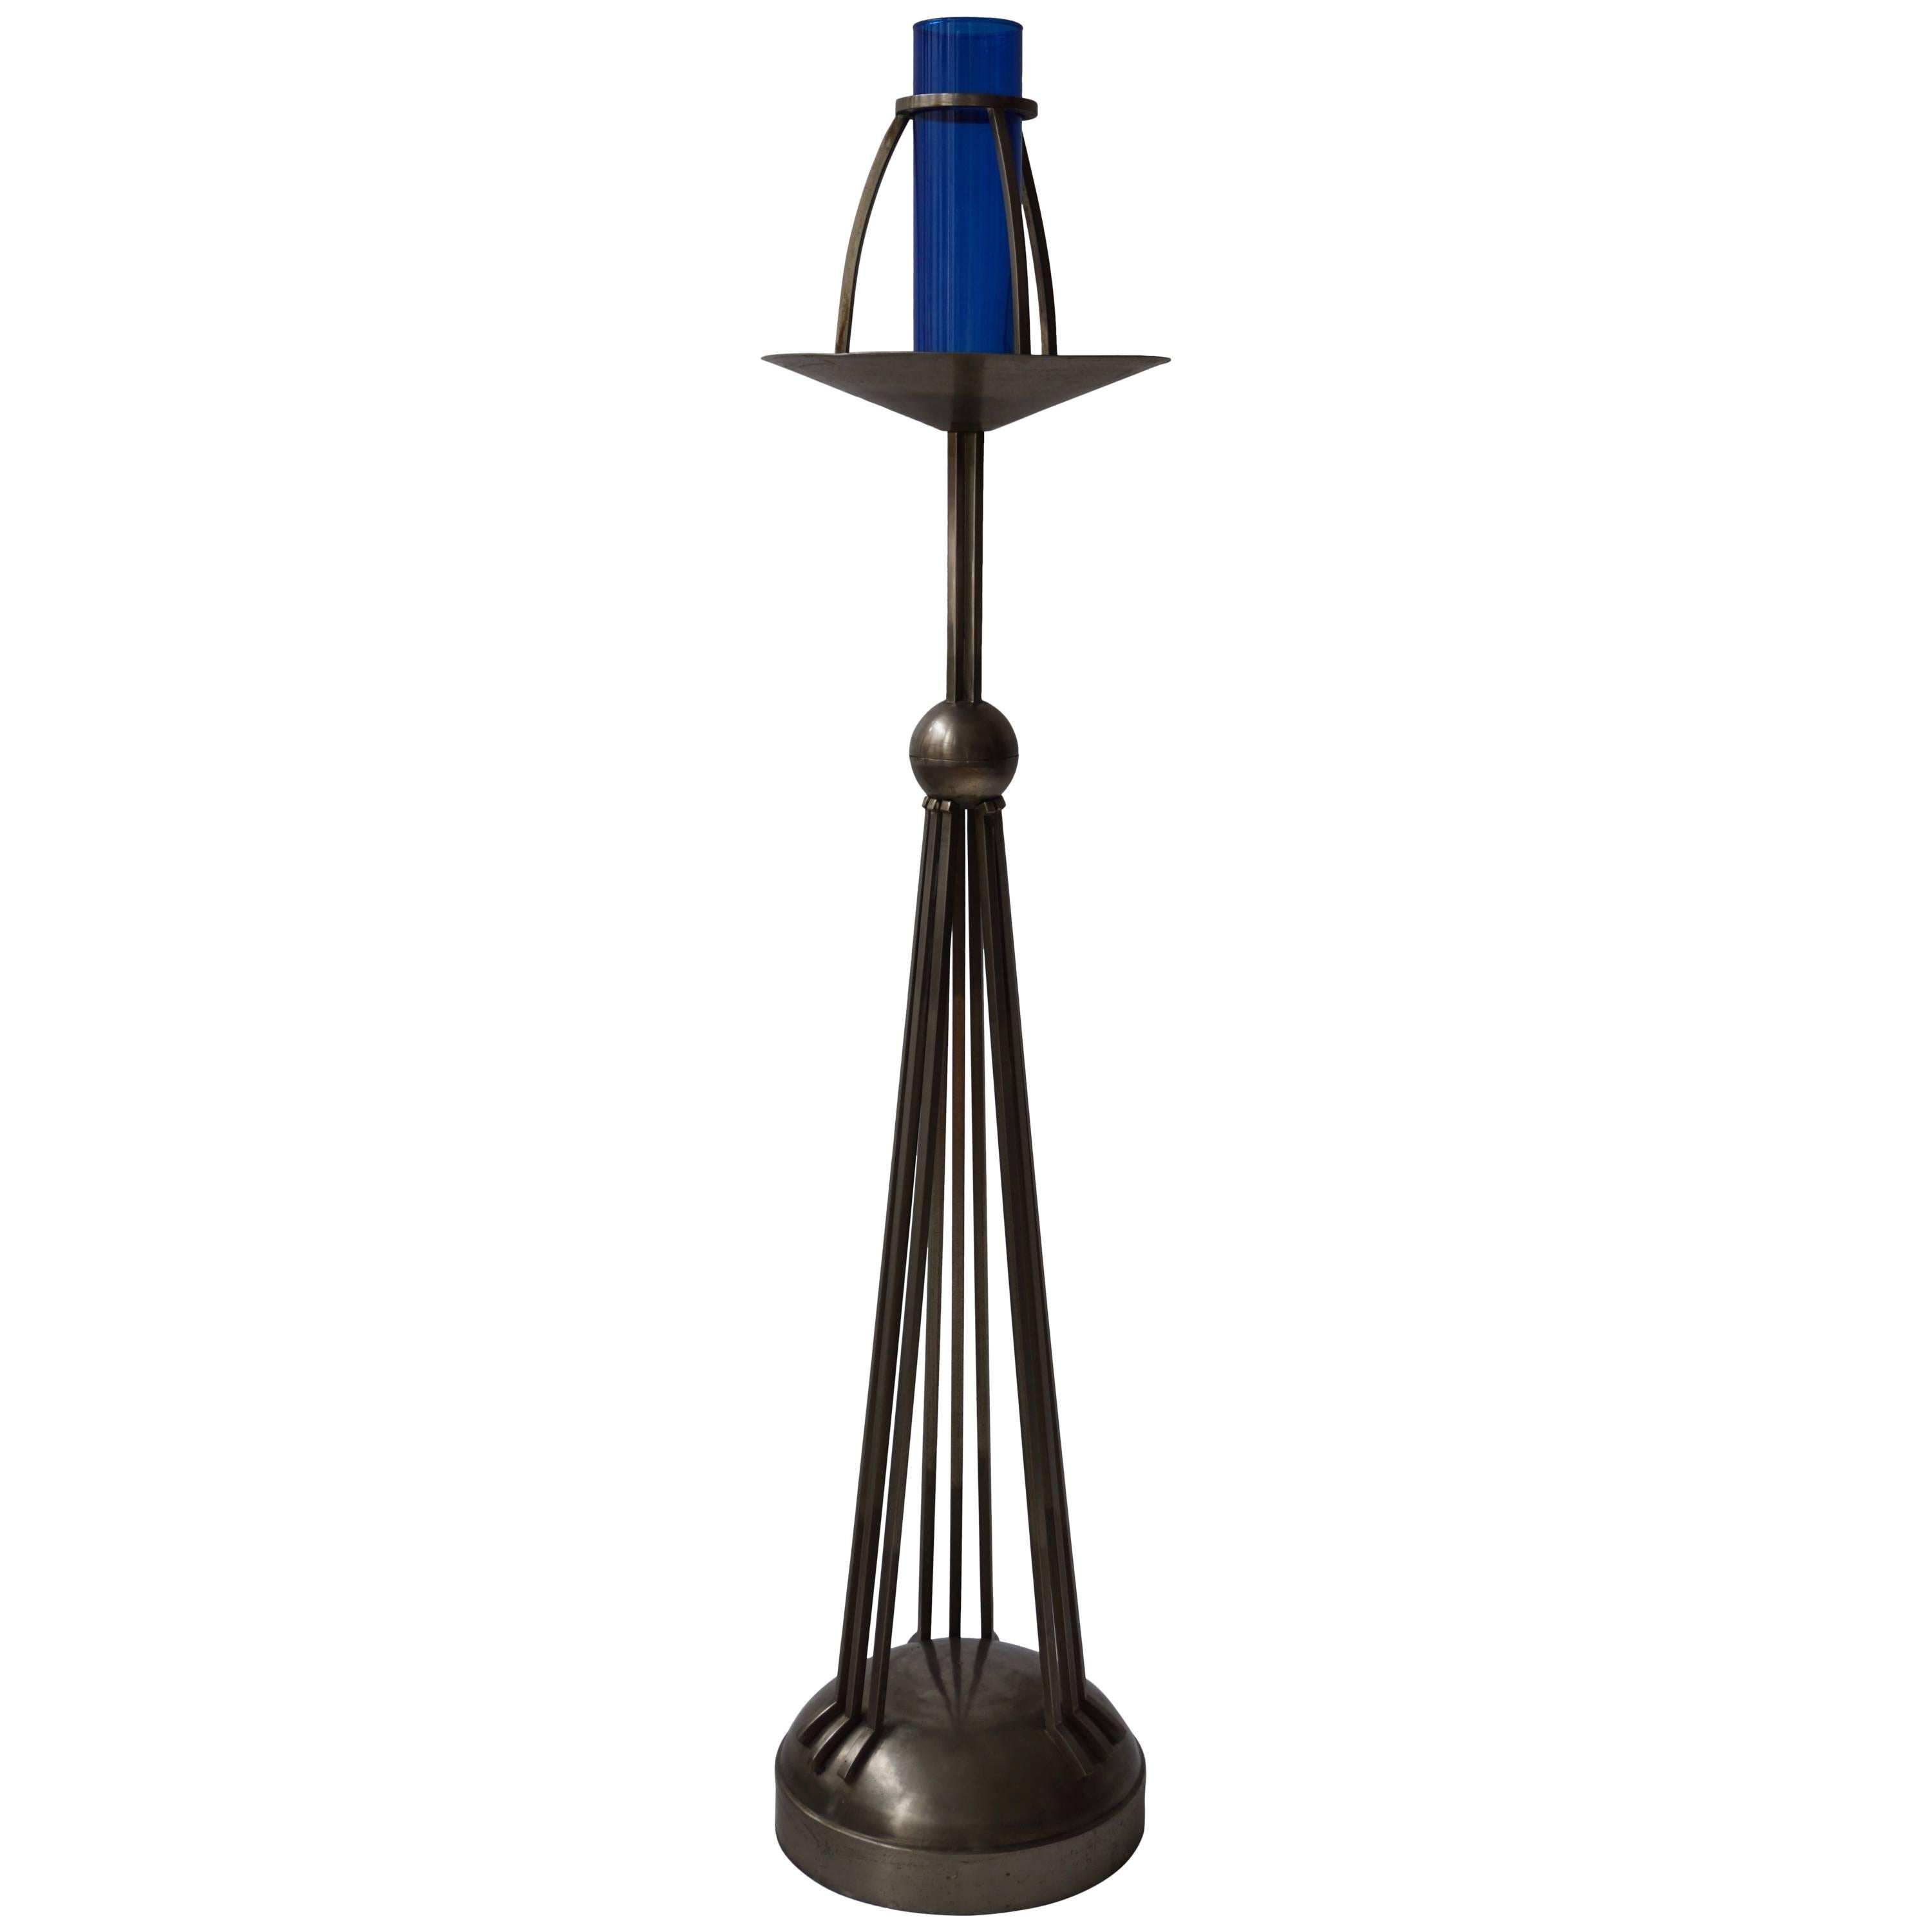 Art Deco Candlestick For Sale